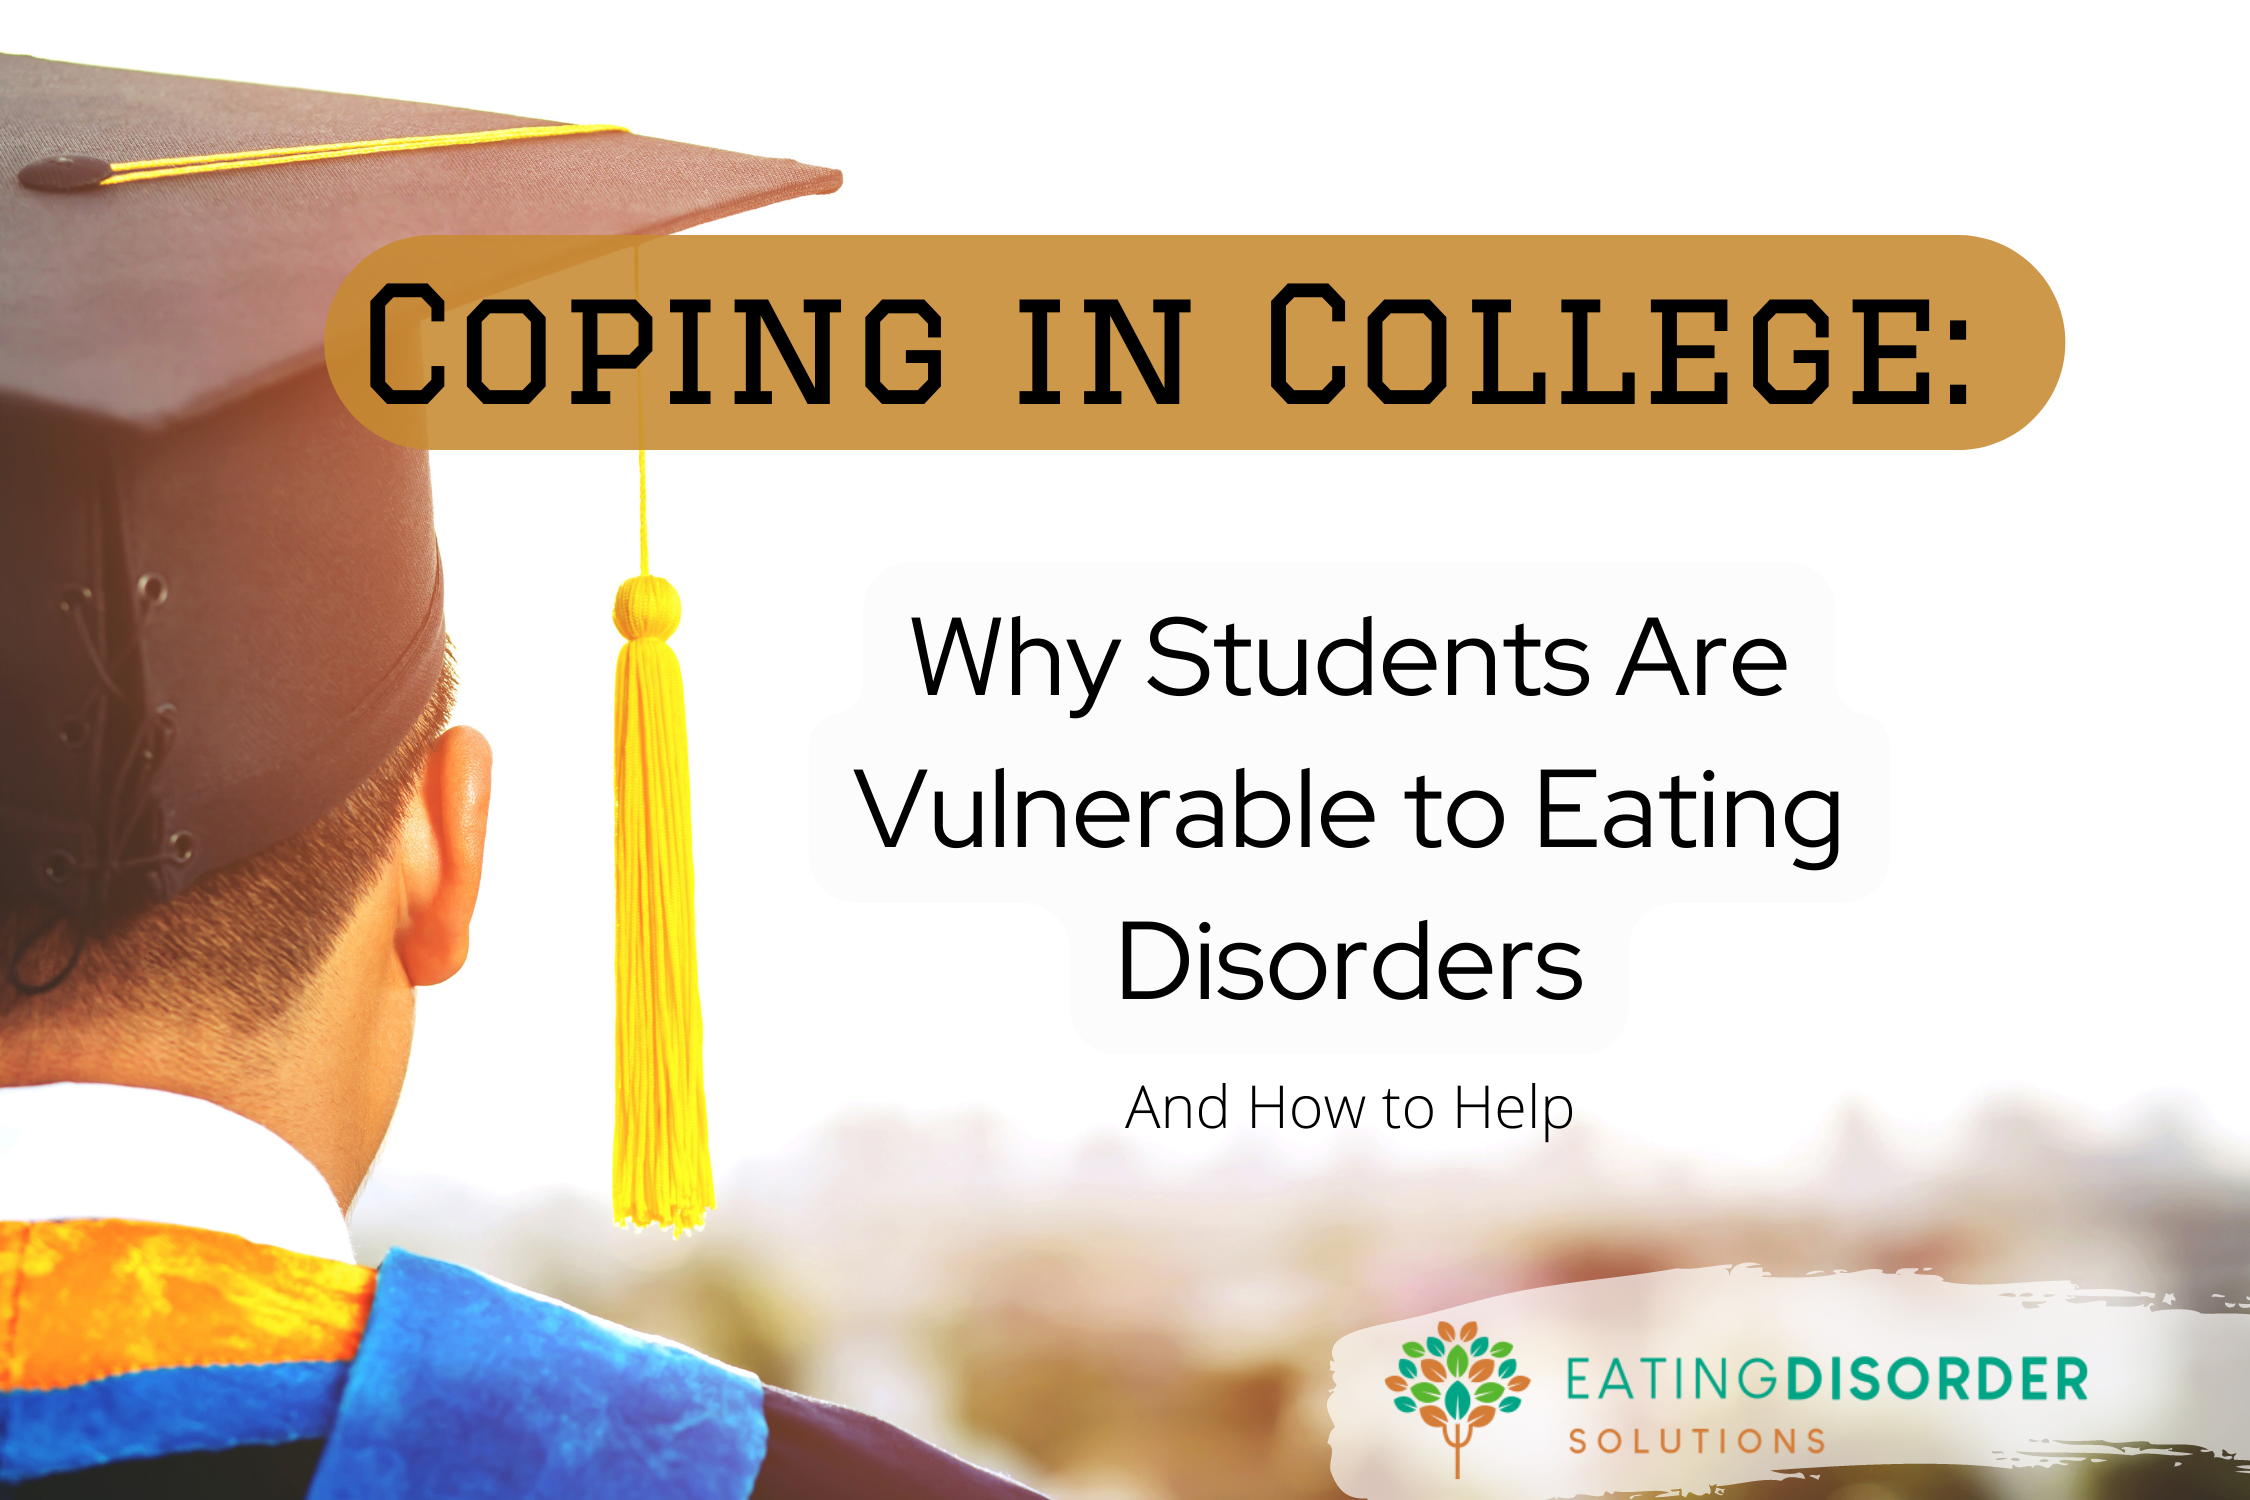 Eating disorders in college students